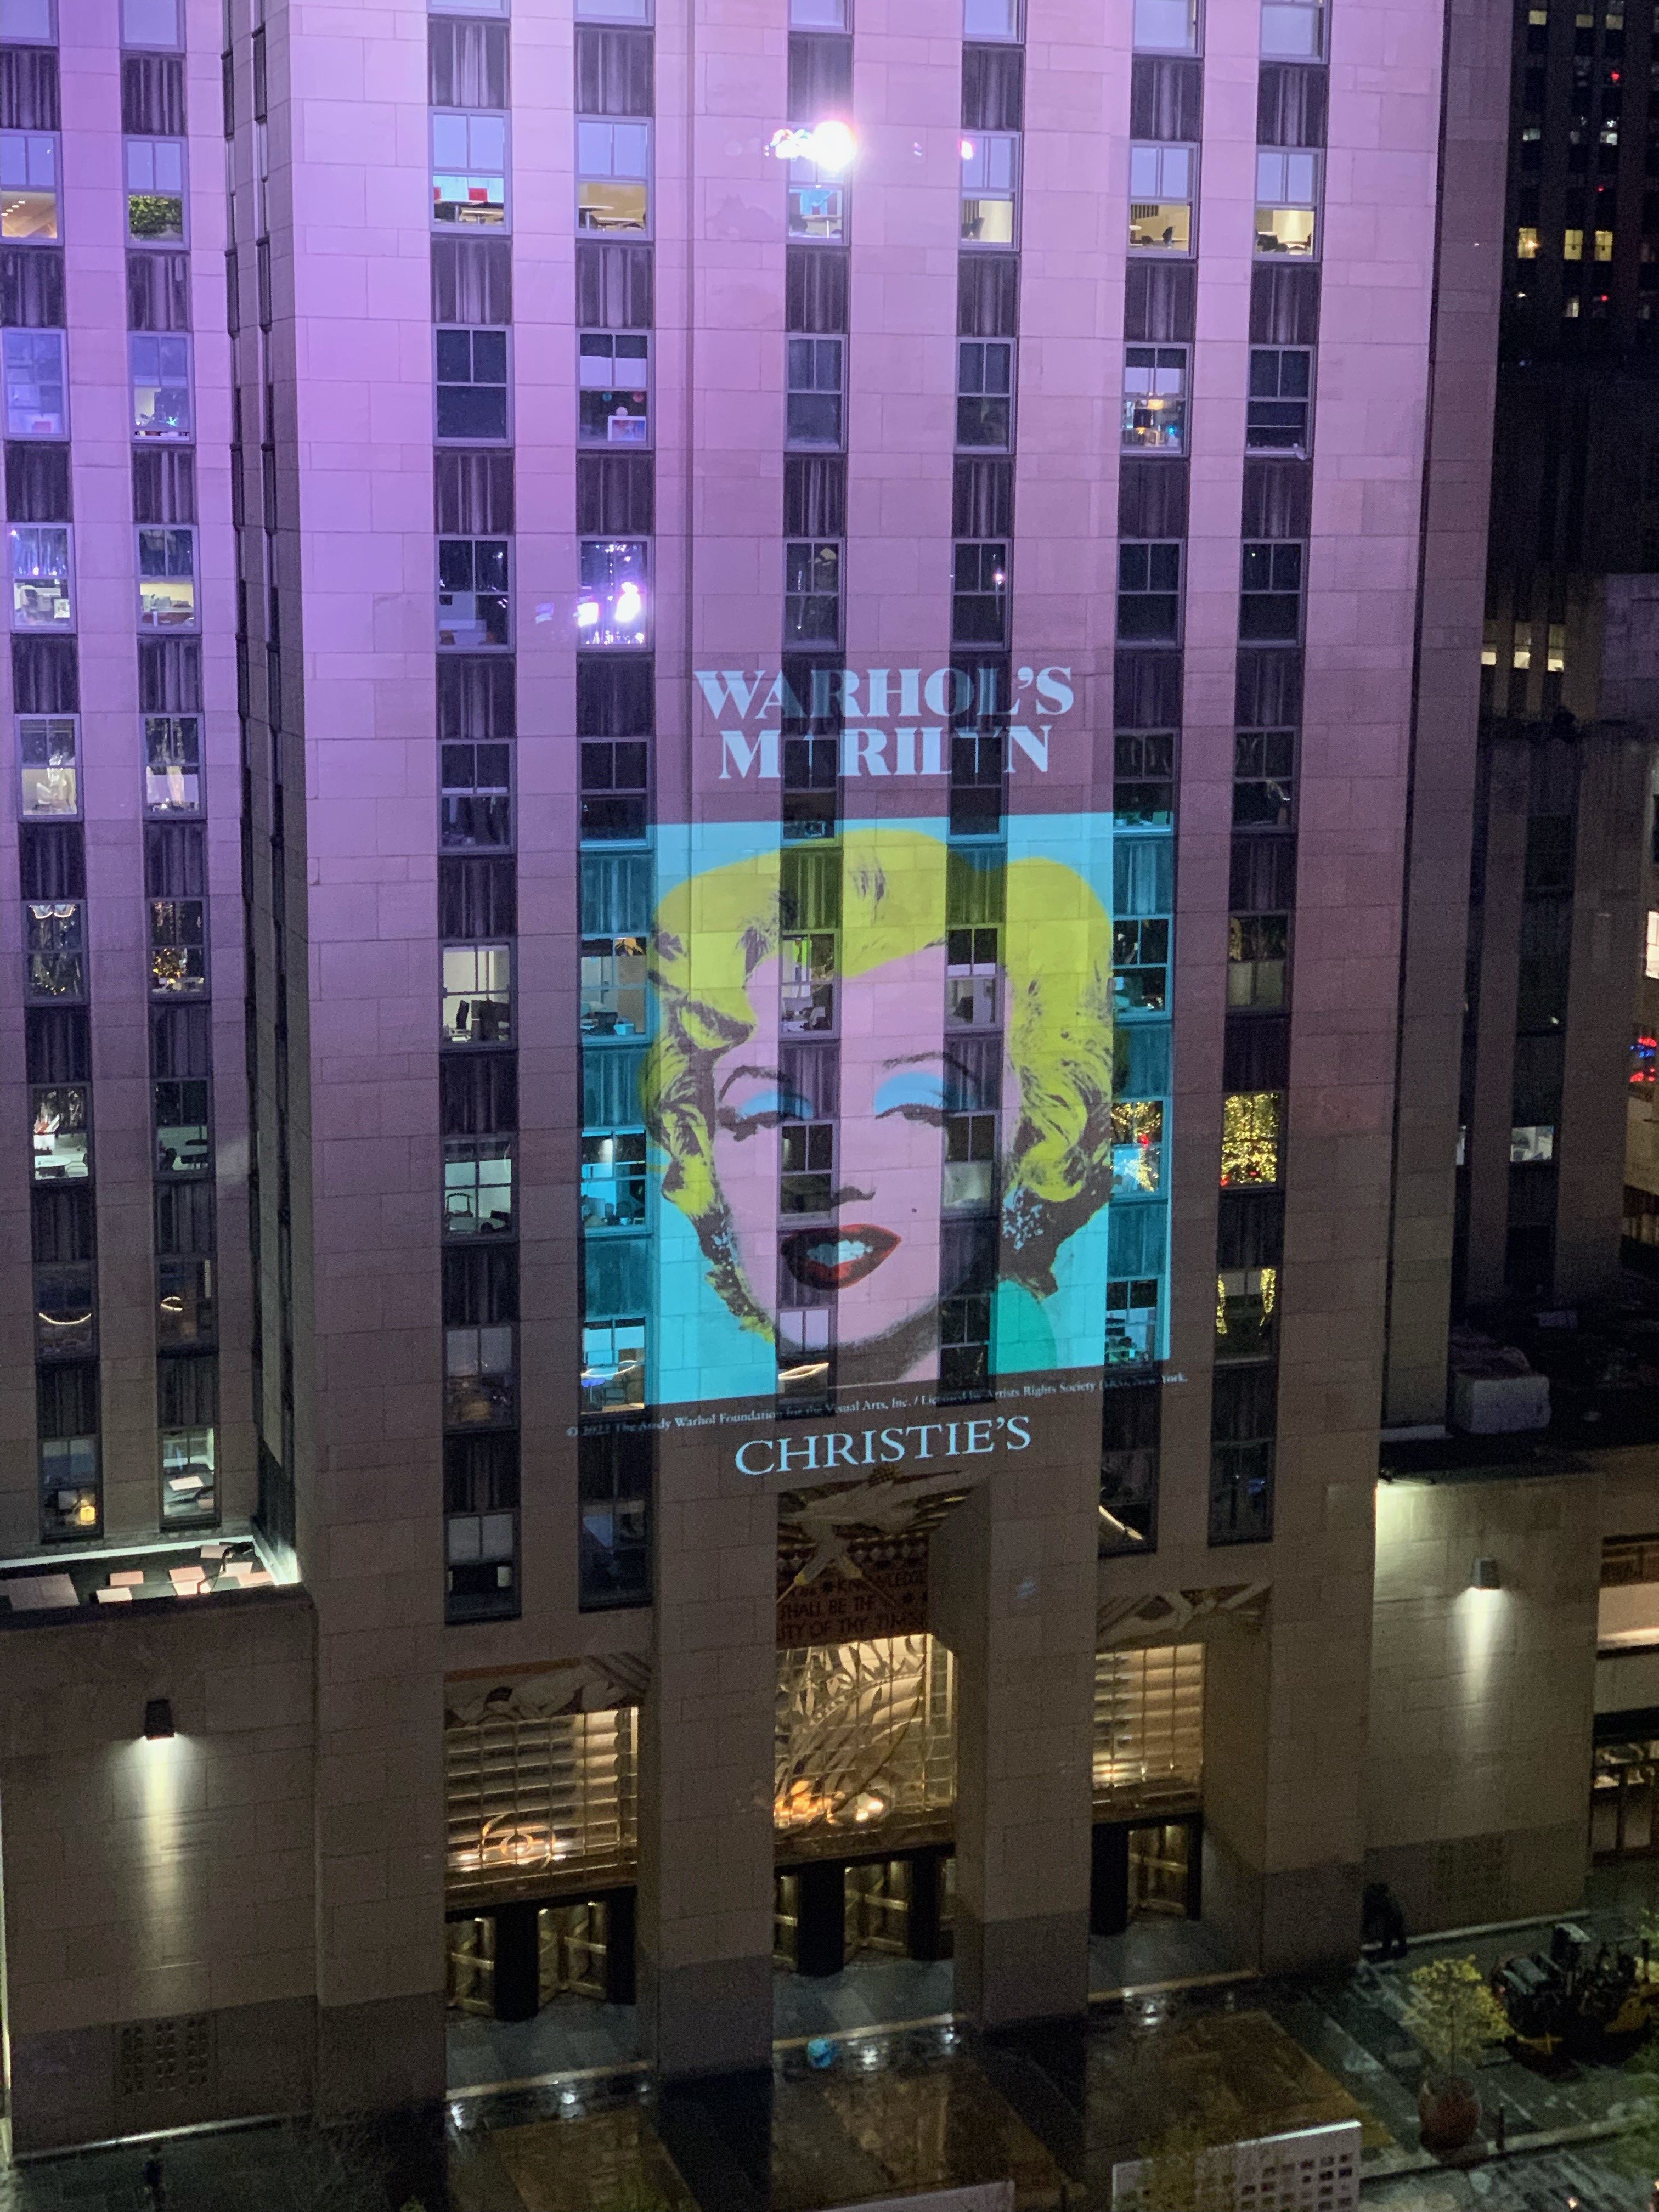 For the Next Two Weeks, Christie’s Will Project Andy Warhol’s Portrait of Marilyn Monroe Onto the Facade of Rockefeller Center